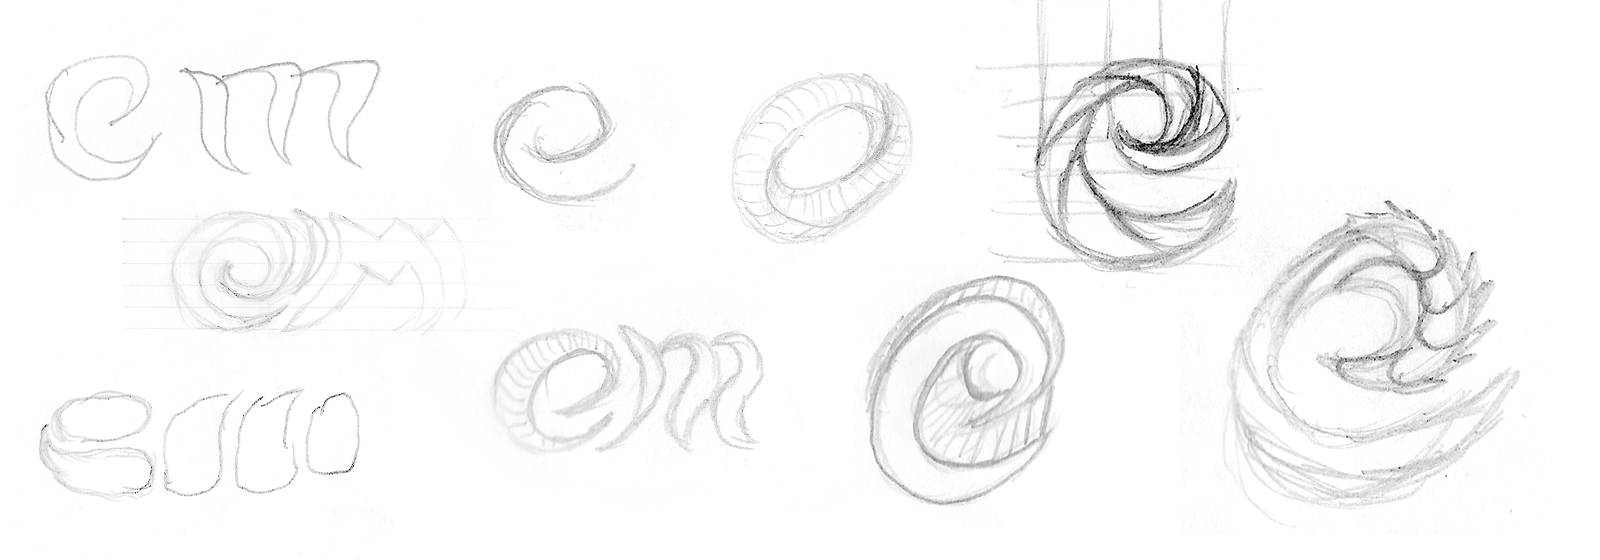 Sketches showing the evolution of the logo idea.